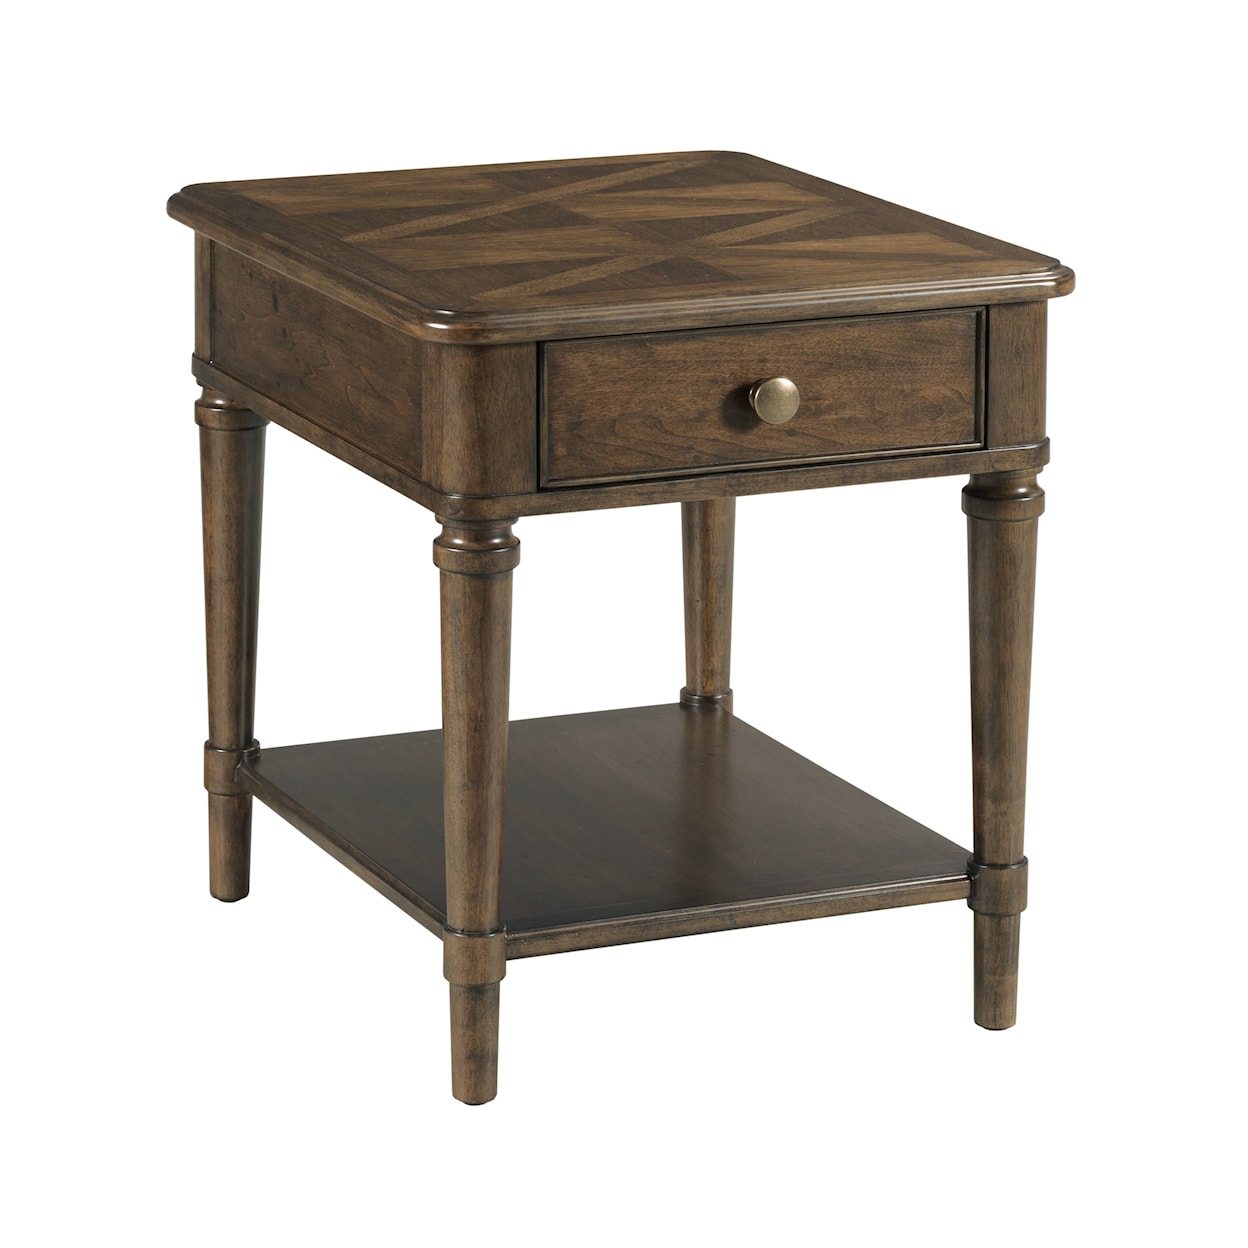 Hammary Astoria Marquess End Table